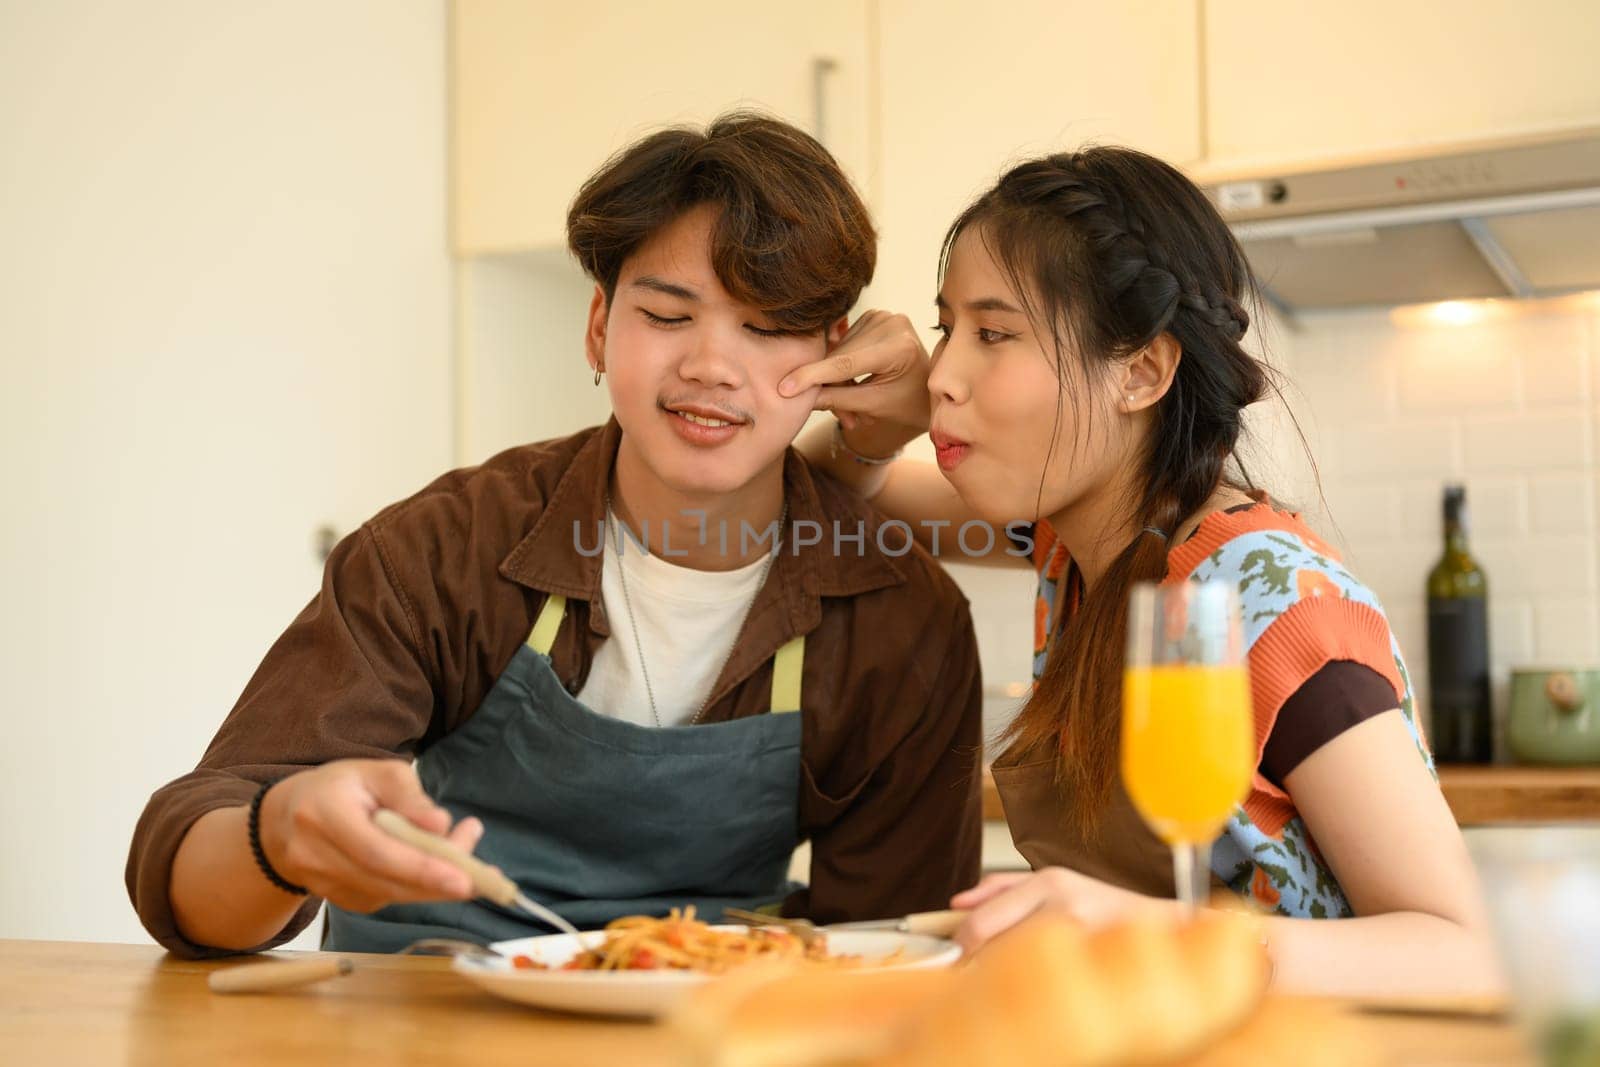 Loving young couple having romantic dinner together at home. People, relationships and food concept.